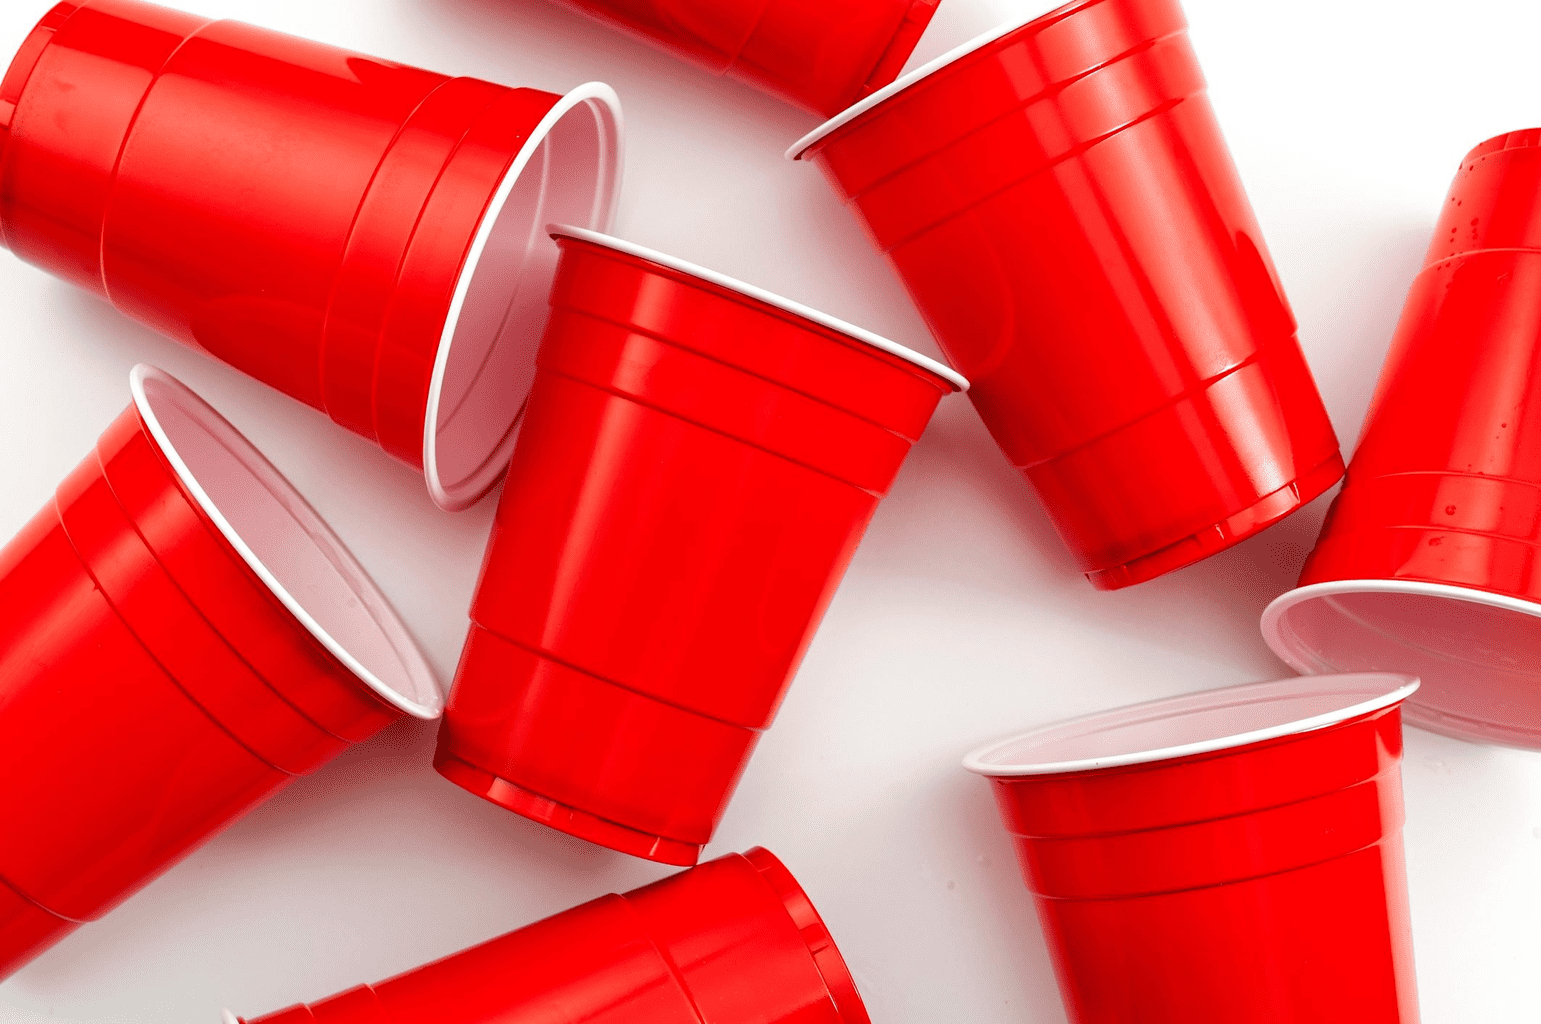 Why Put a Red Cup Under Toilet Seat?